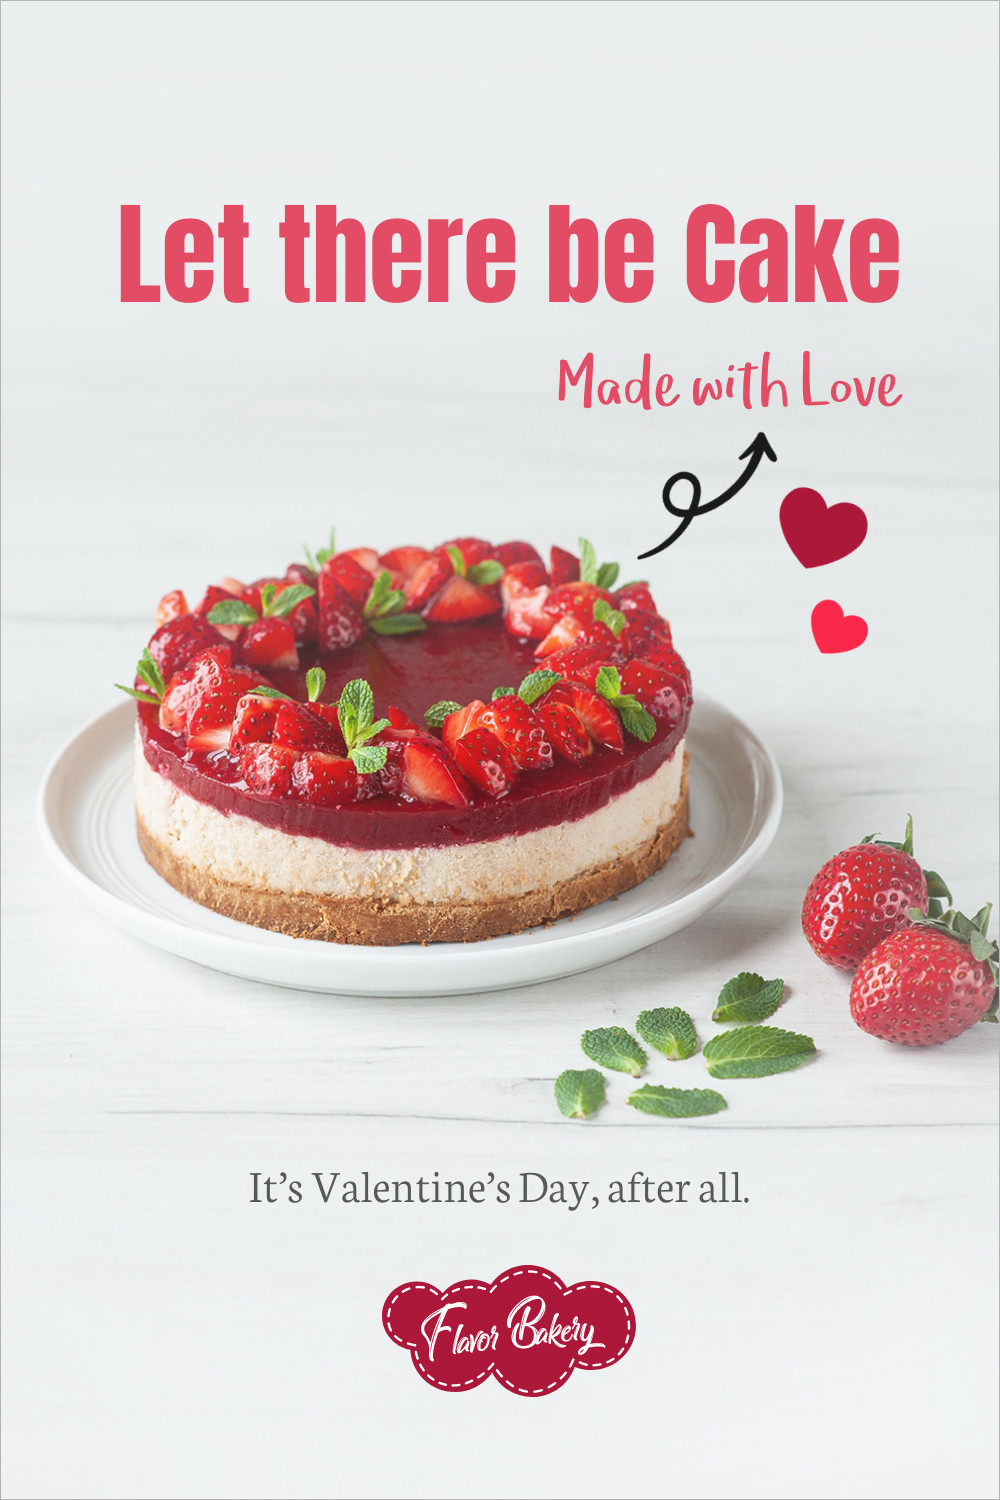 Let There Be Cake on Valentine's Day Inline Rectangle 300x250